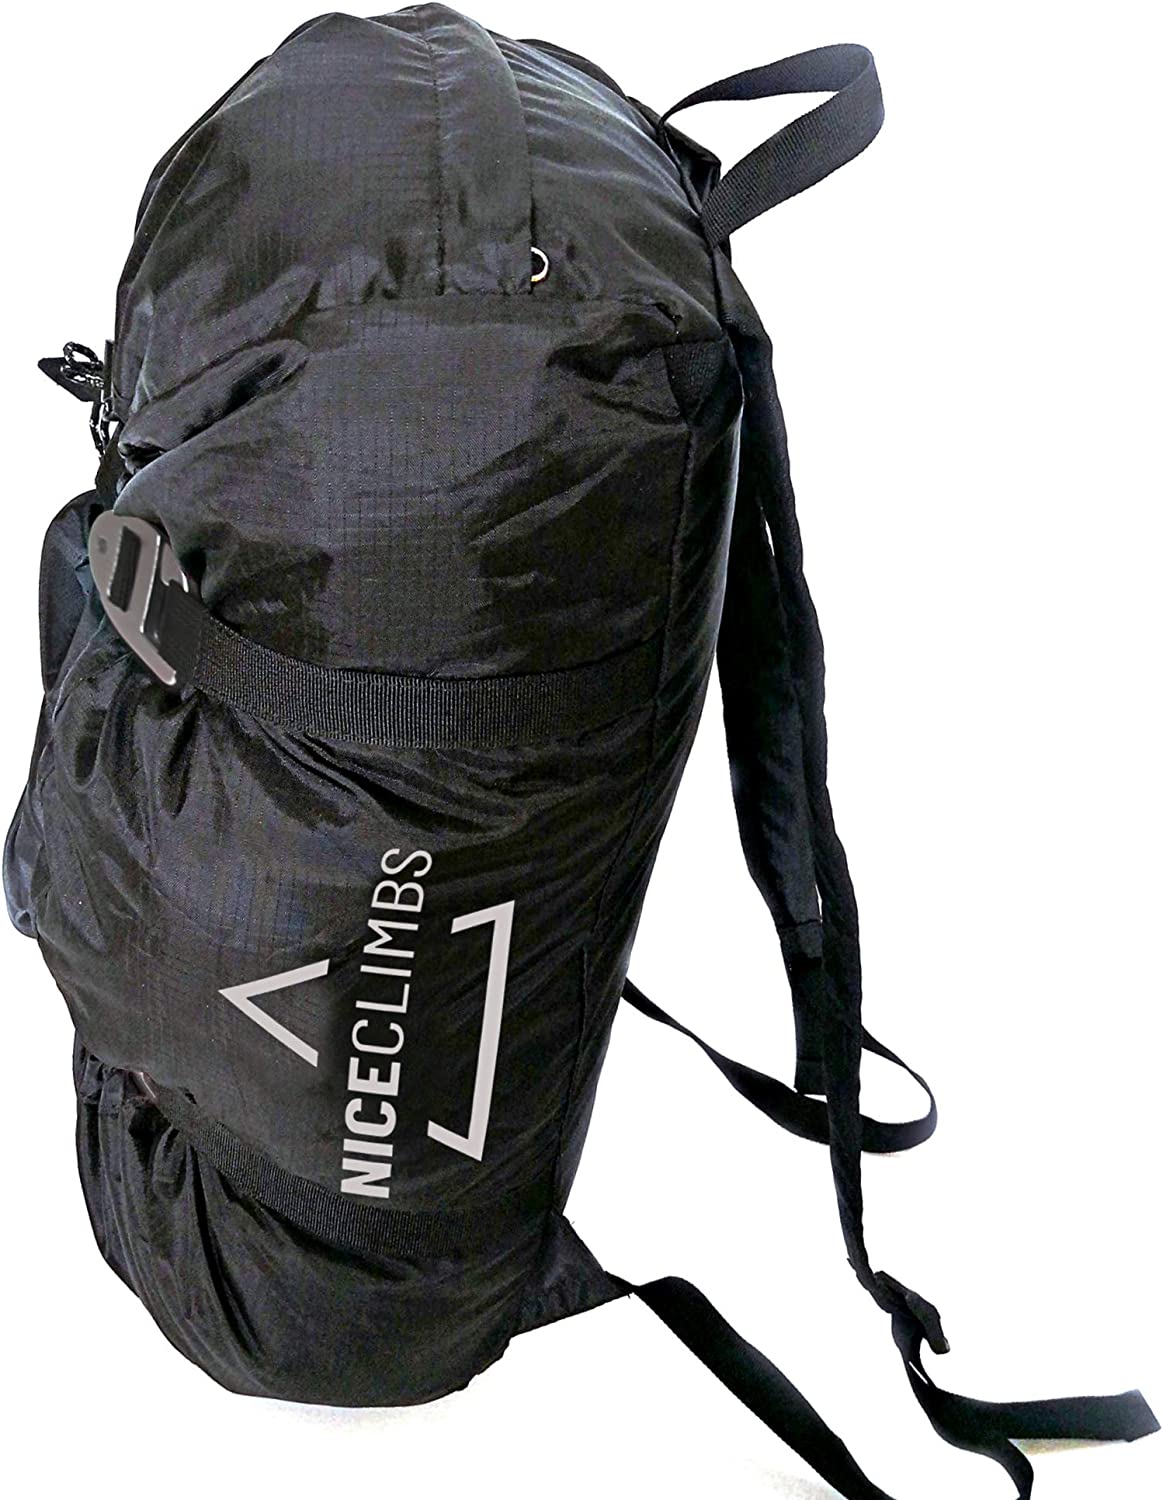 gifts-for-rock-climber-bag